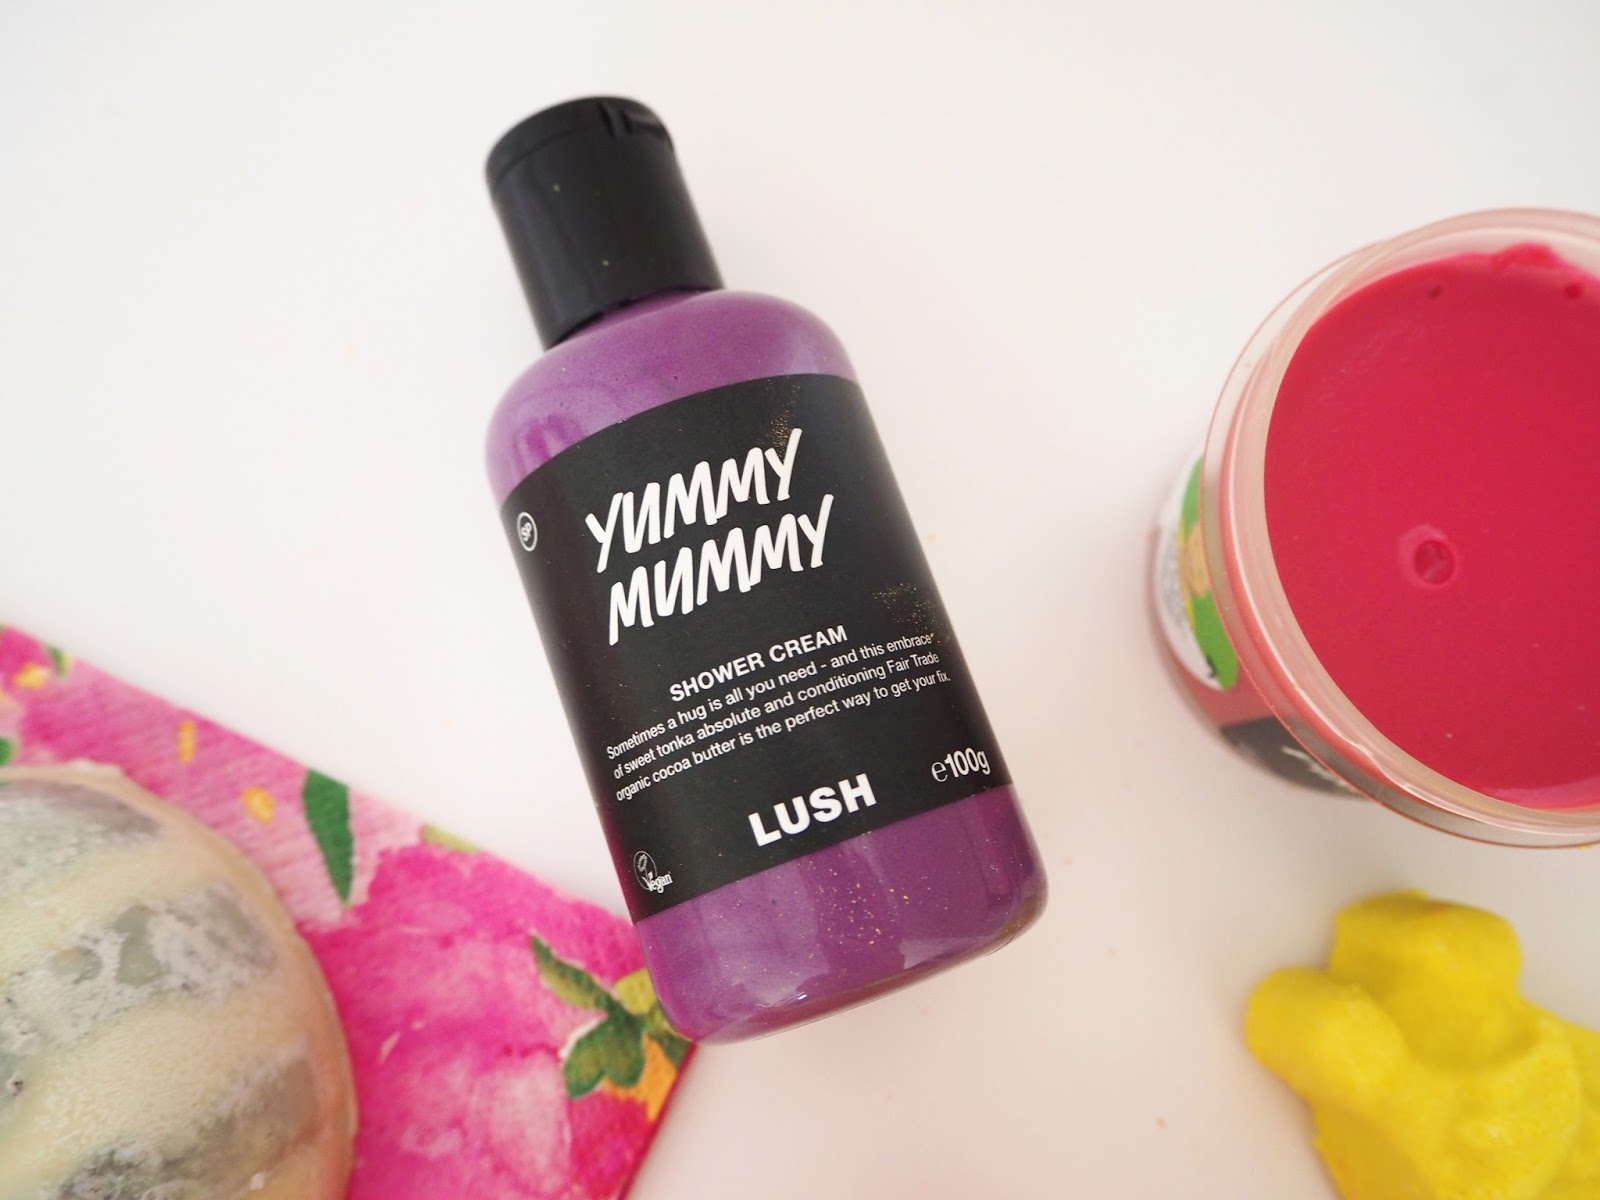 Lush Mother's Day Collection 2017,  Katie Kirk Loves, Lush Cosmetics UK, Lush 2017, Beauty Blogger, UK Blogger, Gifts For Her, Mother's Day Gifts, Gift Ideas, Lush Review, Lush Gifts, Bath & Body Products, Blogger Review